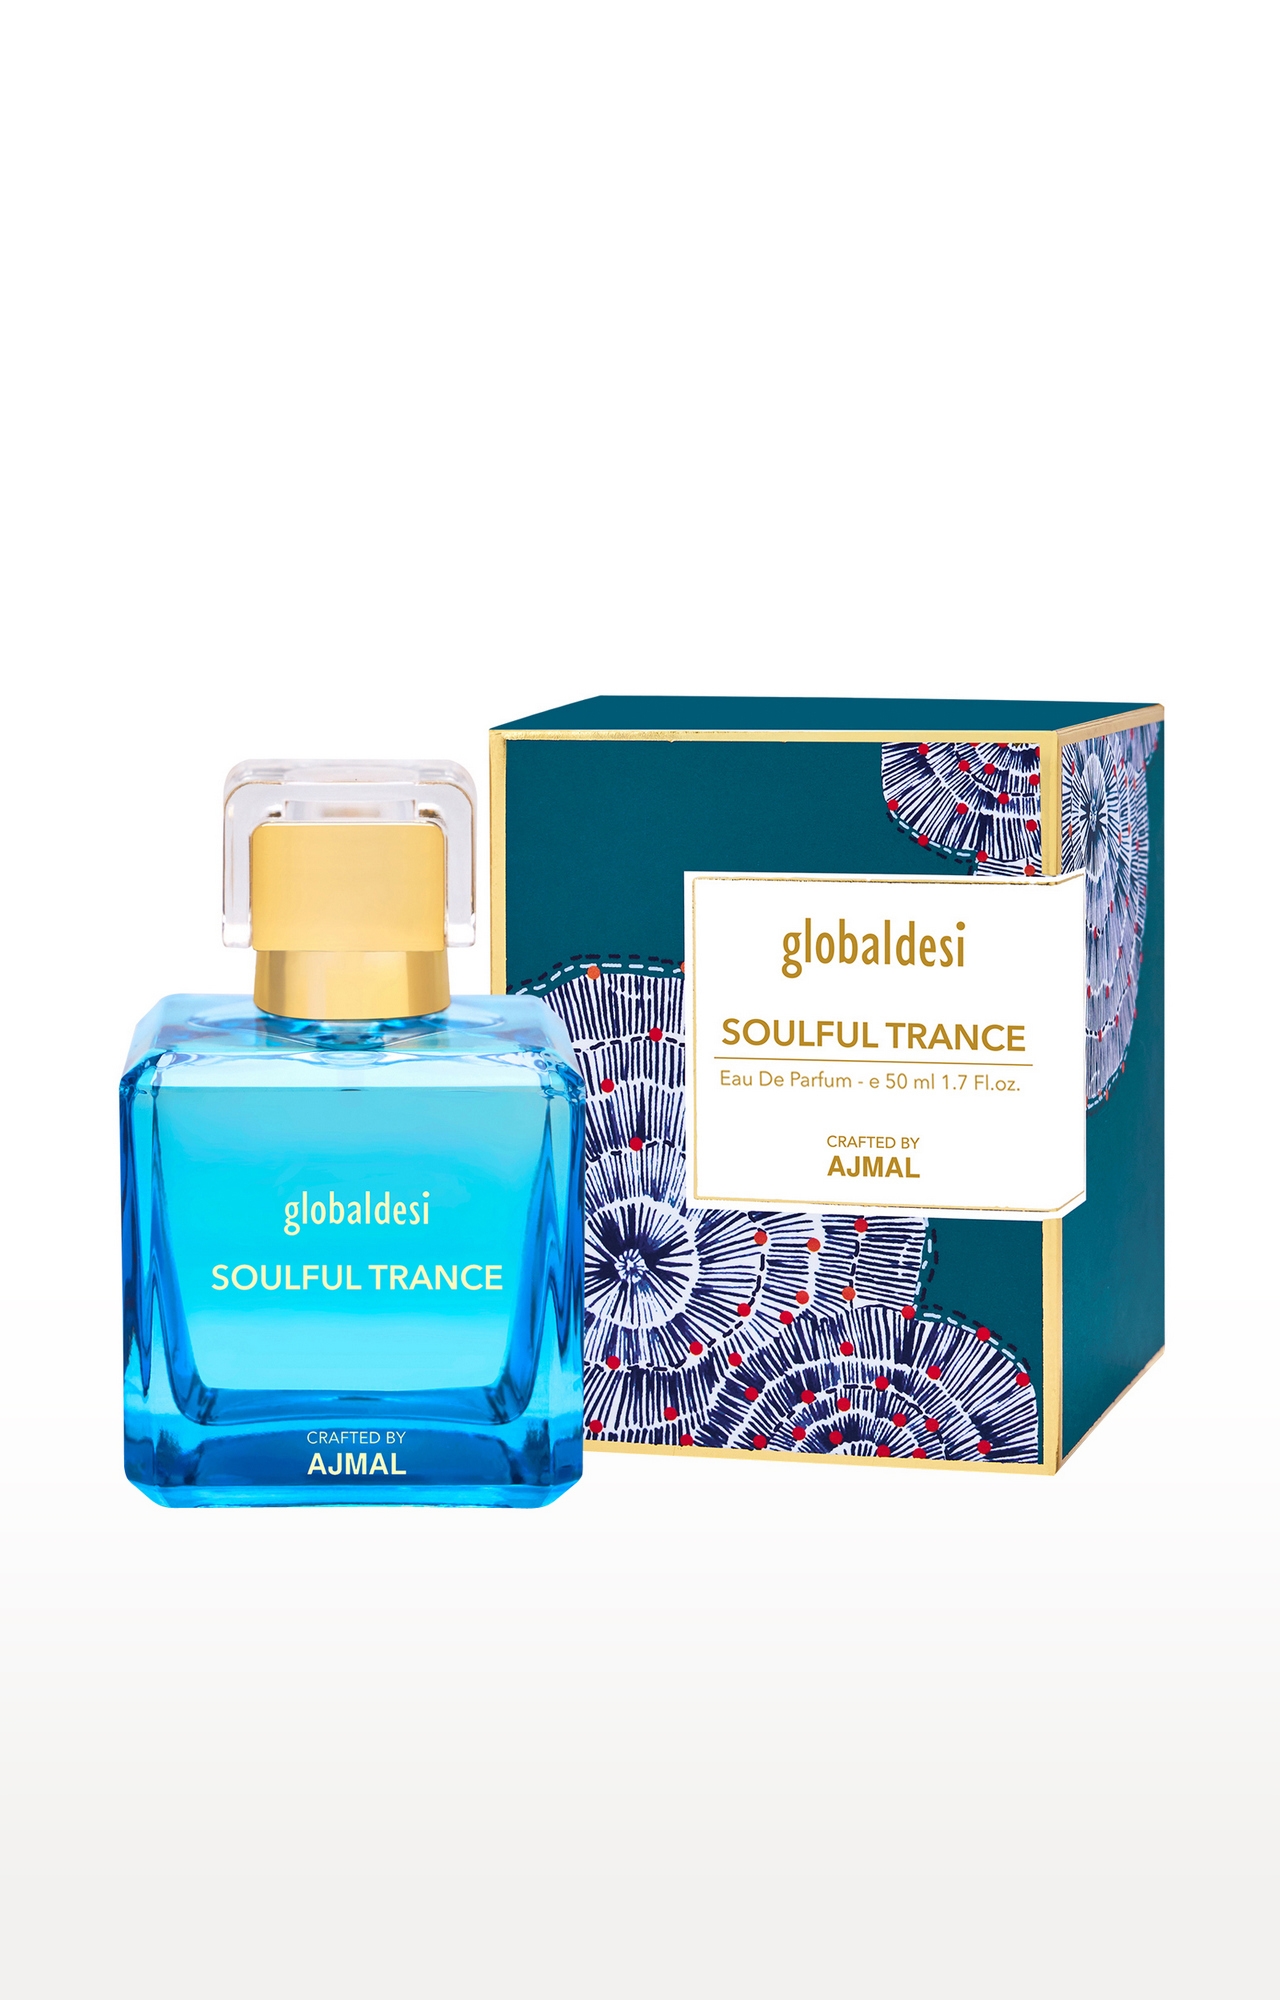 Global Desi Crafted By Ajmal | Global Desi Soulful Trance Eau De Parfum 50ML for Women Crafted by Ajmal